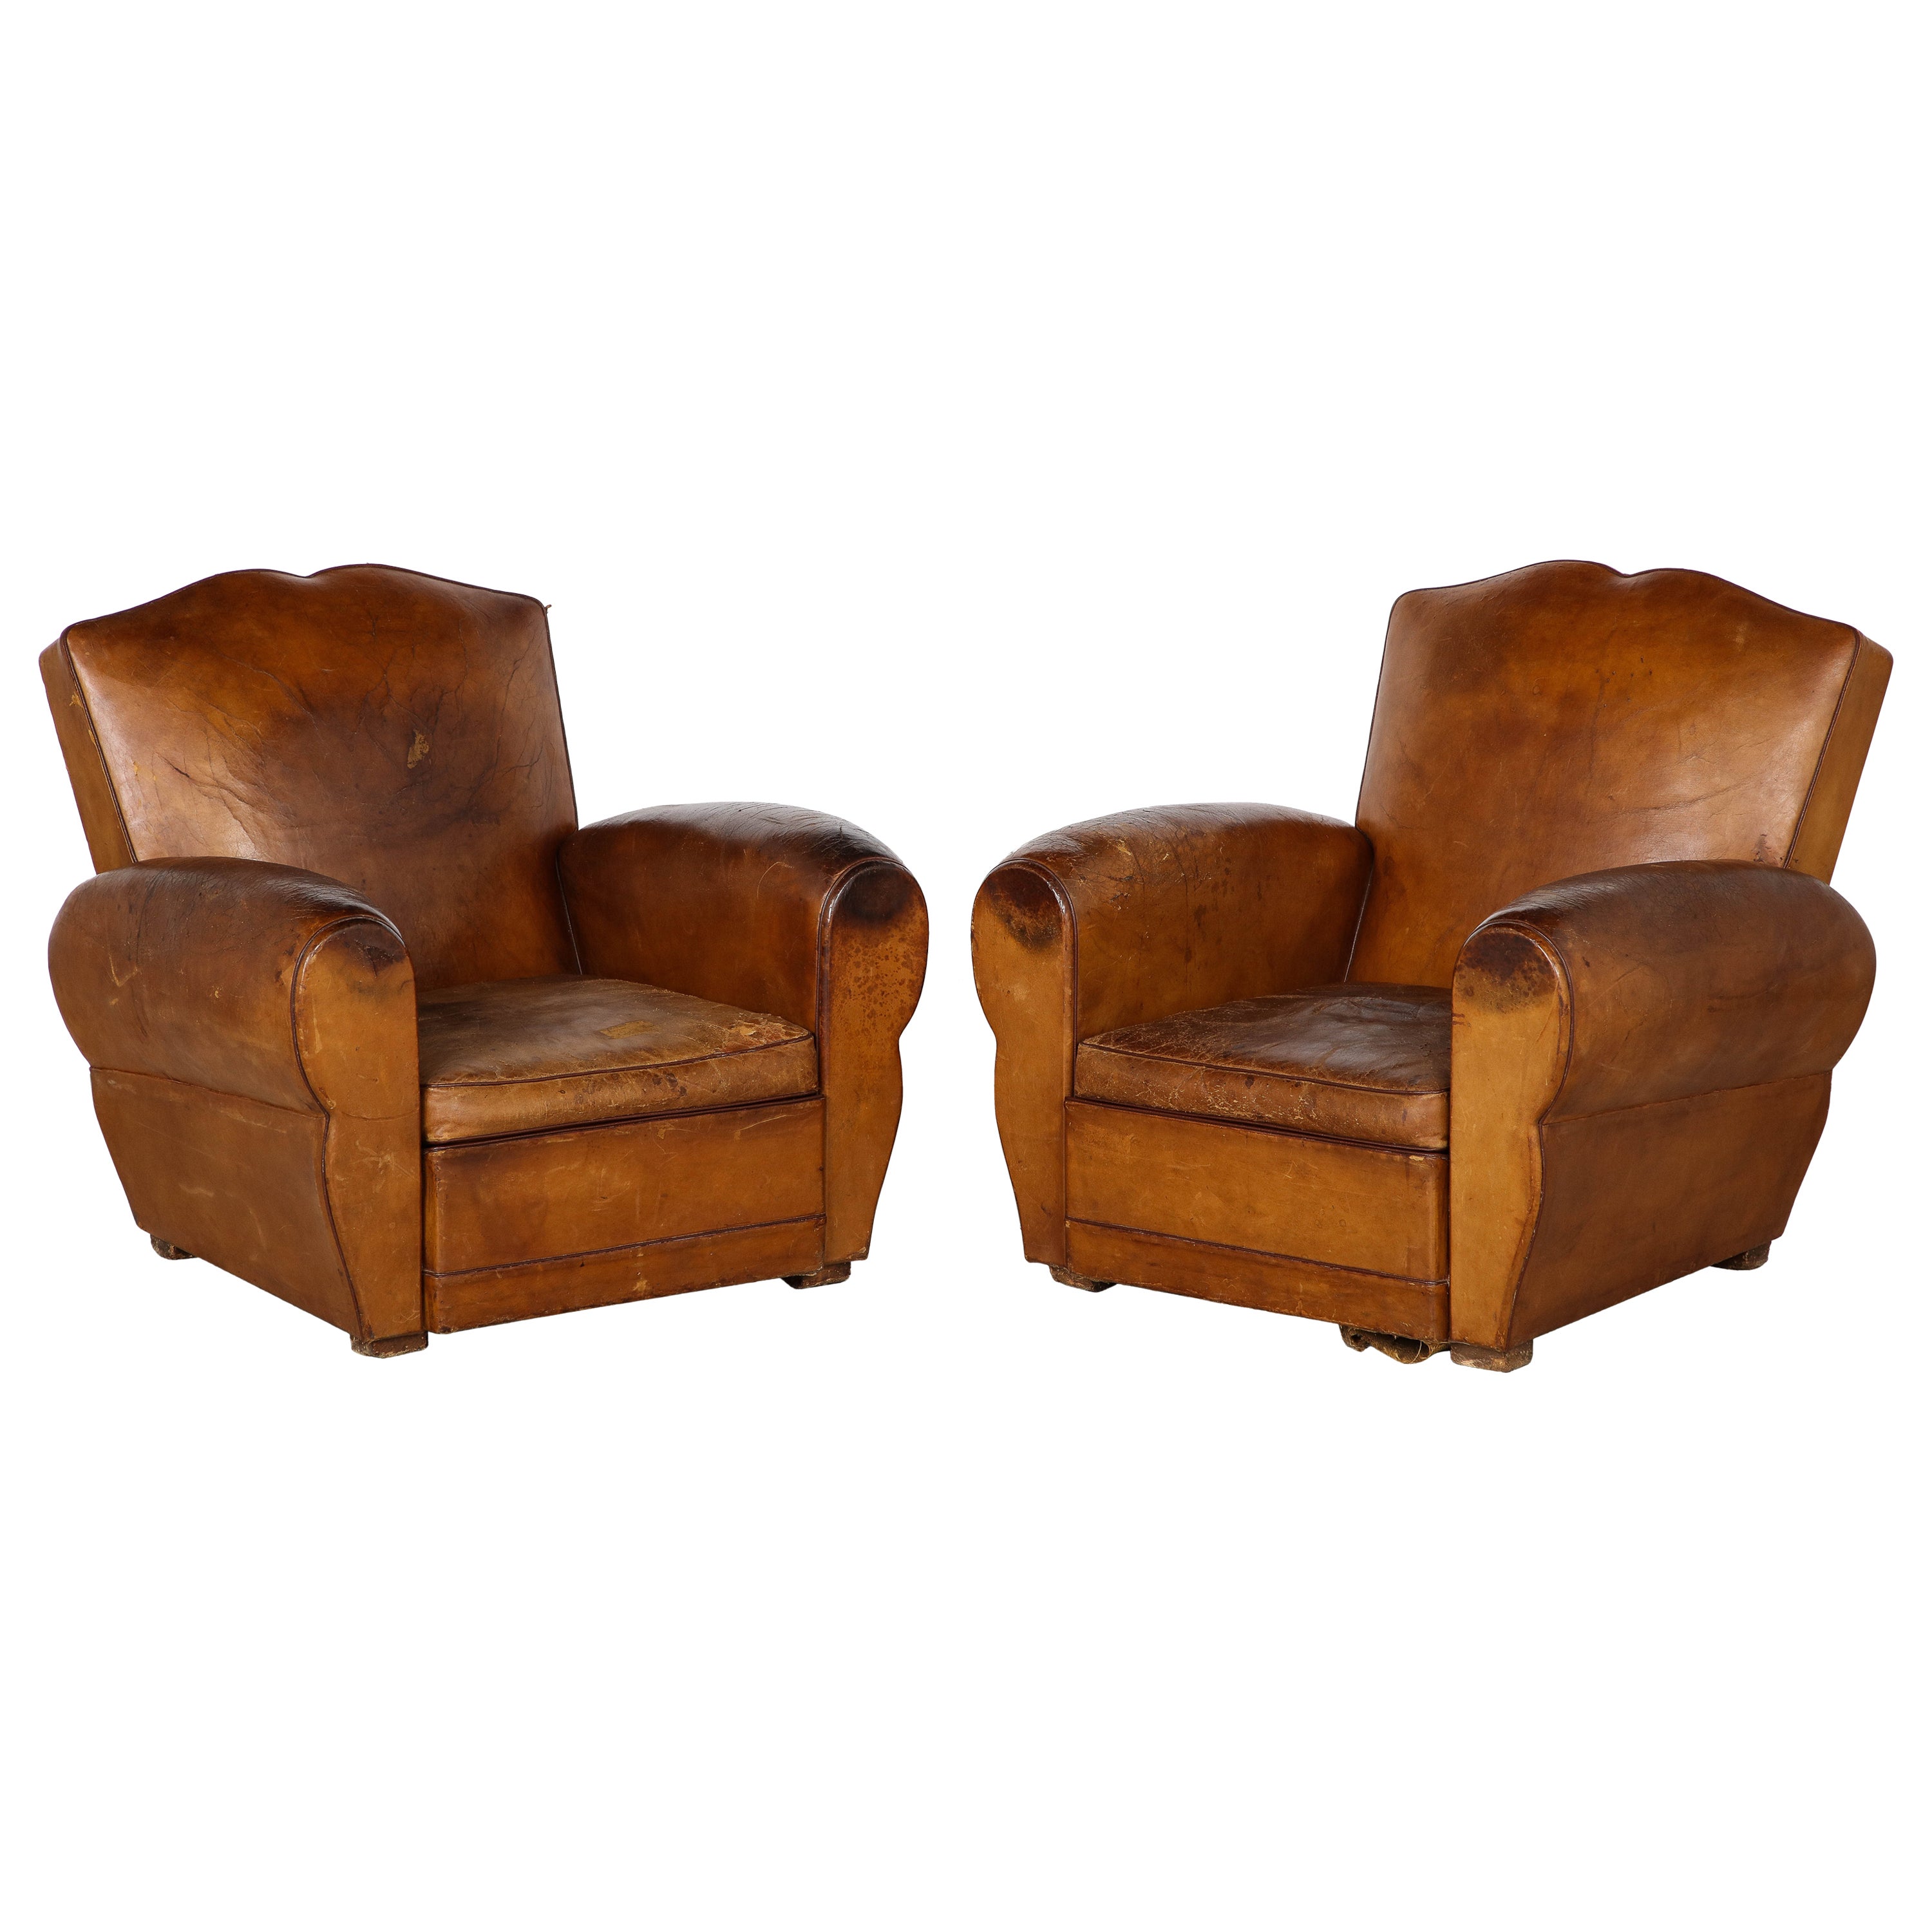 Pair of French Art Deco 'Moustache' Leather Club Chairs, Paris, circa 1920 